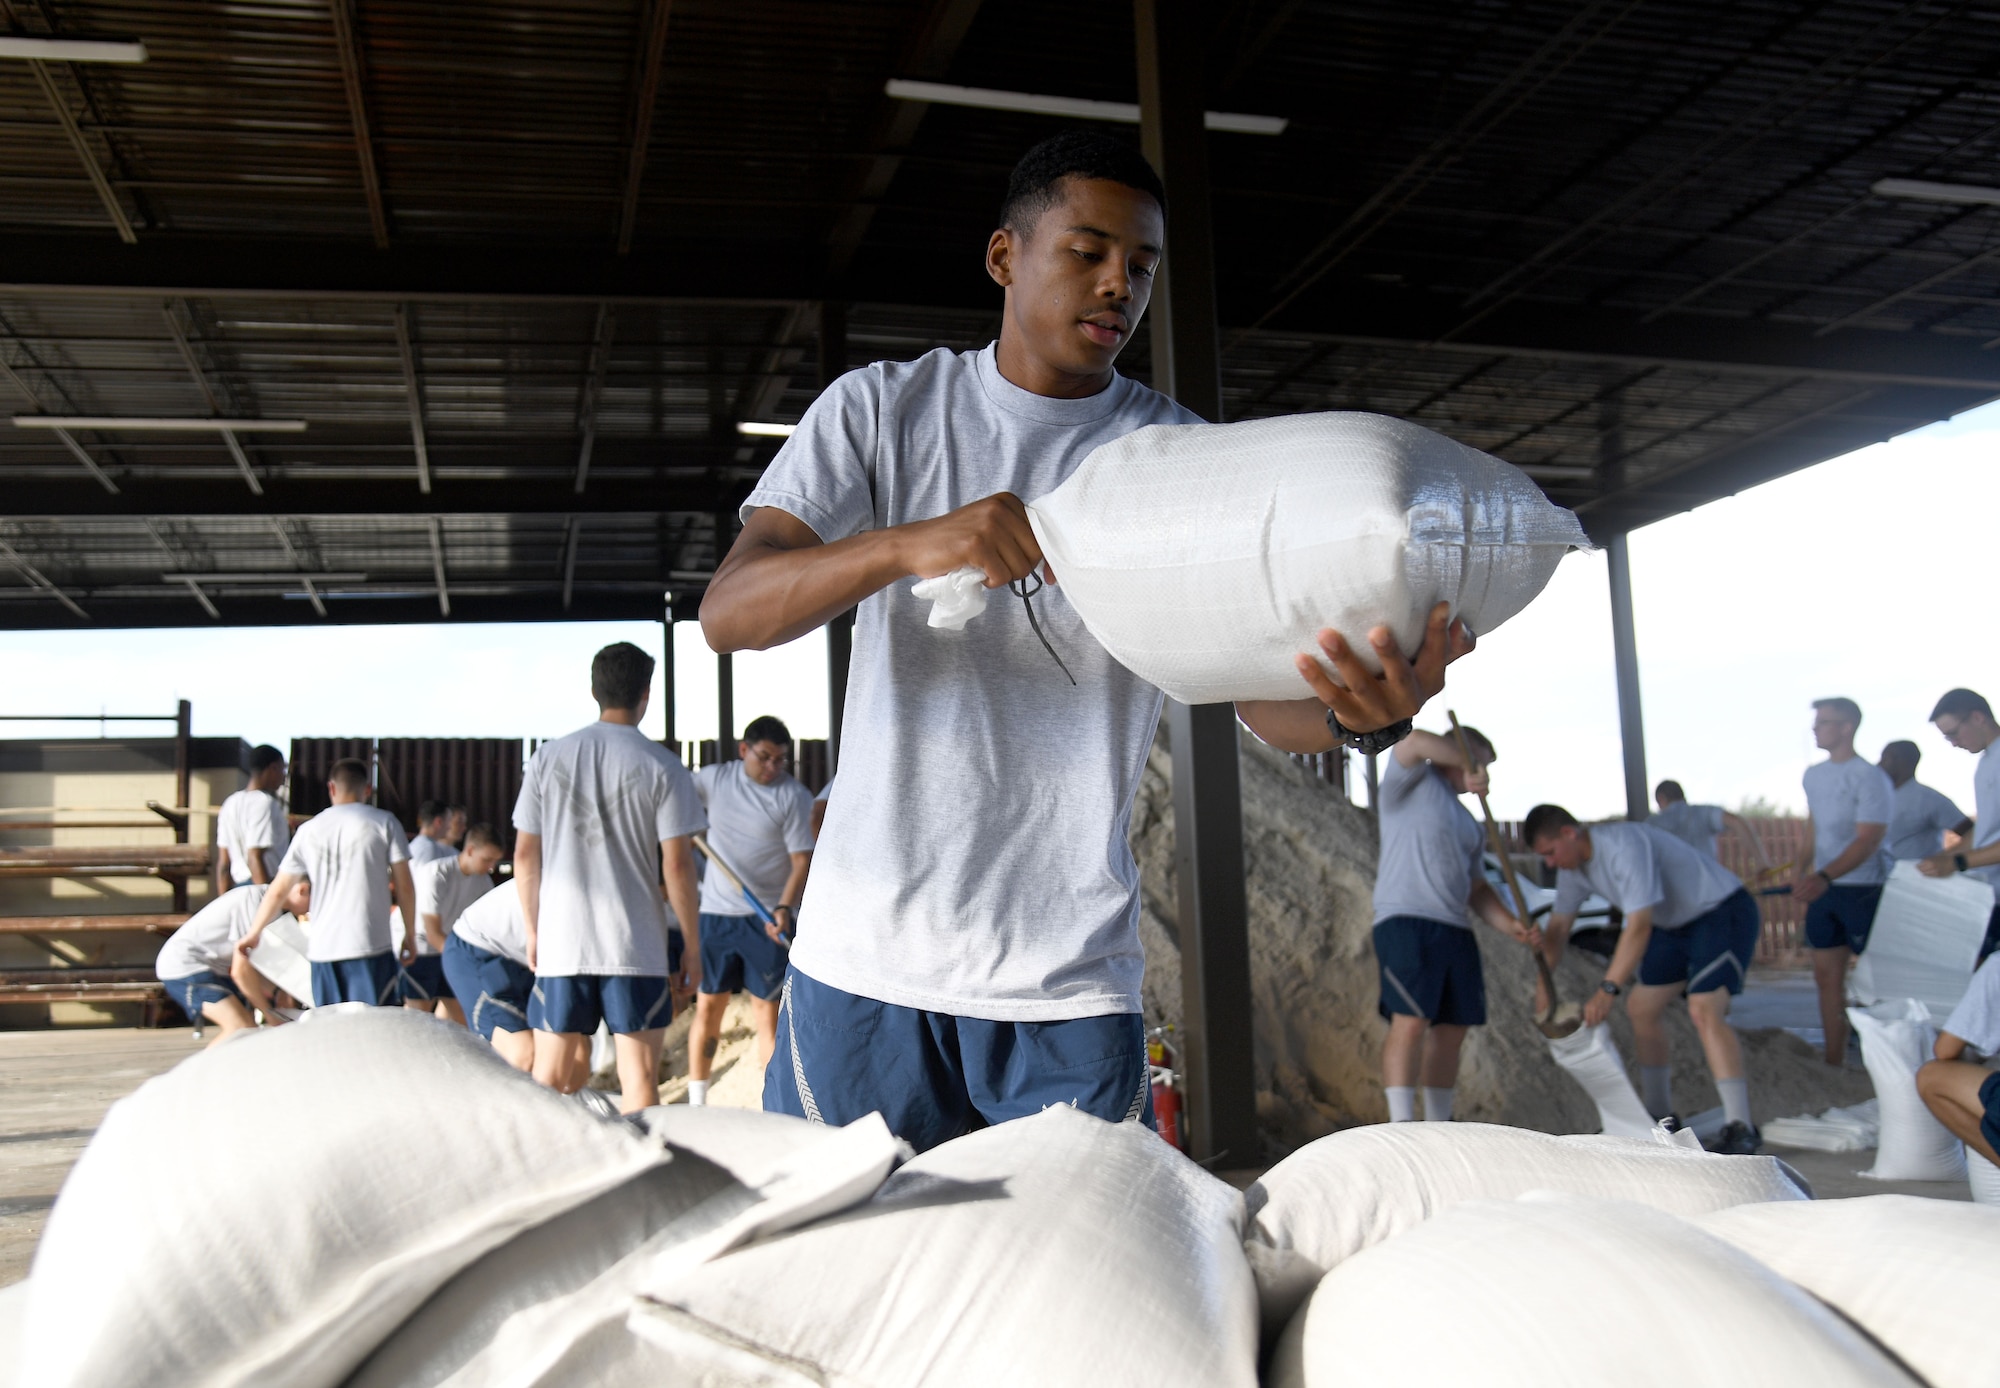 U.S. Air Force Airman Basic Jerimiah Augustine, 338th Training Squadron student, stacks sand bags in preparation for the 2022 hurricane season at Keesler Air Force Base, Mississippi, June 27, 2022. Over 40 Airmen from the 338th TRS assisted the 81st Civil Engineer Squadron with filling more than 2500 sand bags. Hurricane season runs from June 1 through November 30. (U.S. Air Force photo by Kemberly Groue)